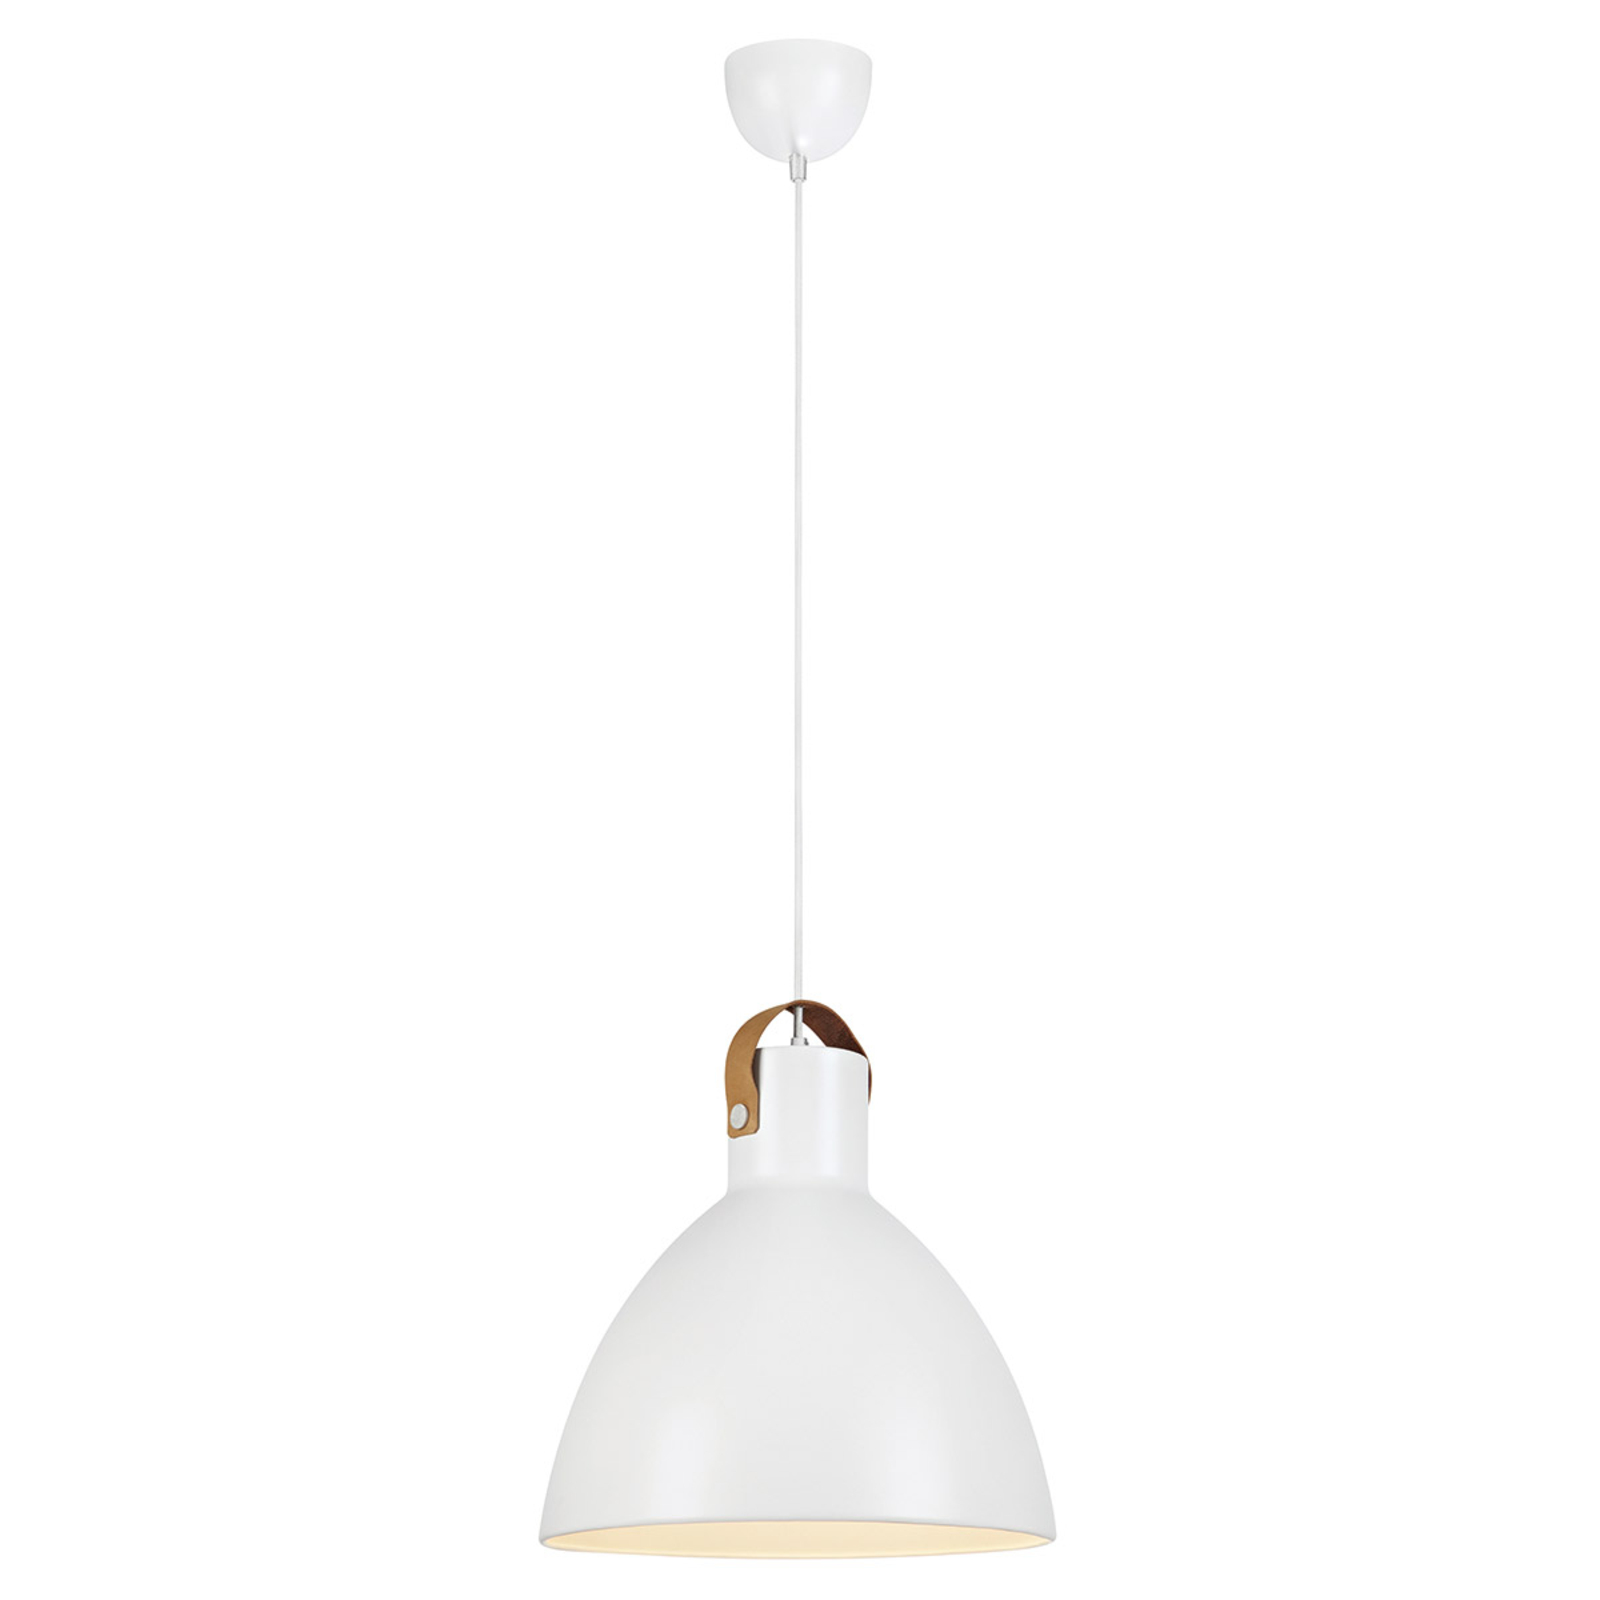 Hanging lamp Eagle with metal shade Ø 35 cm white